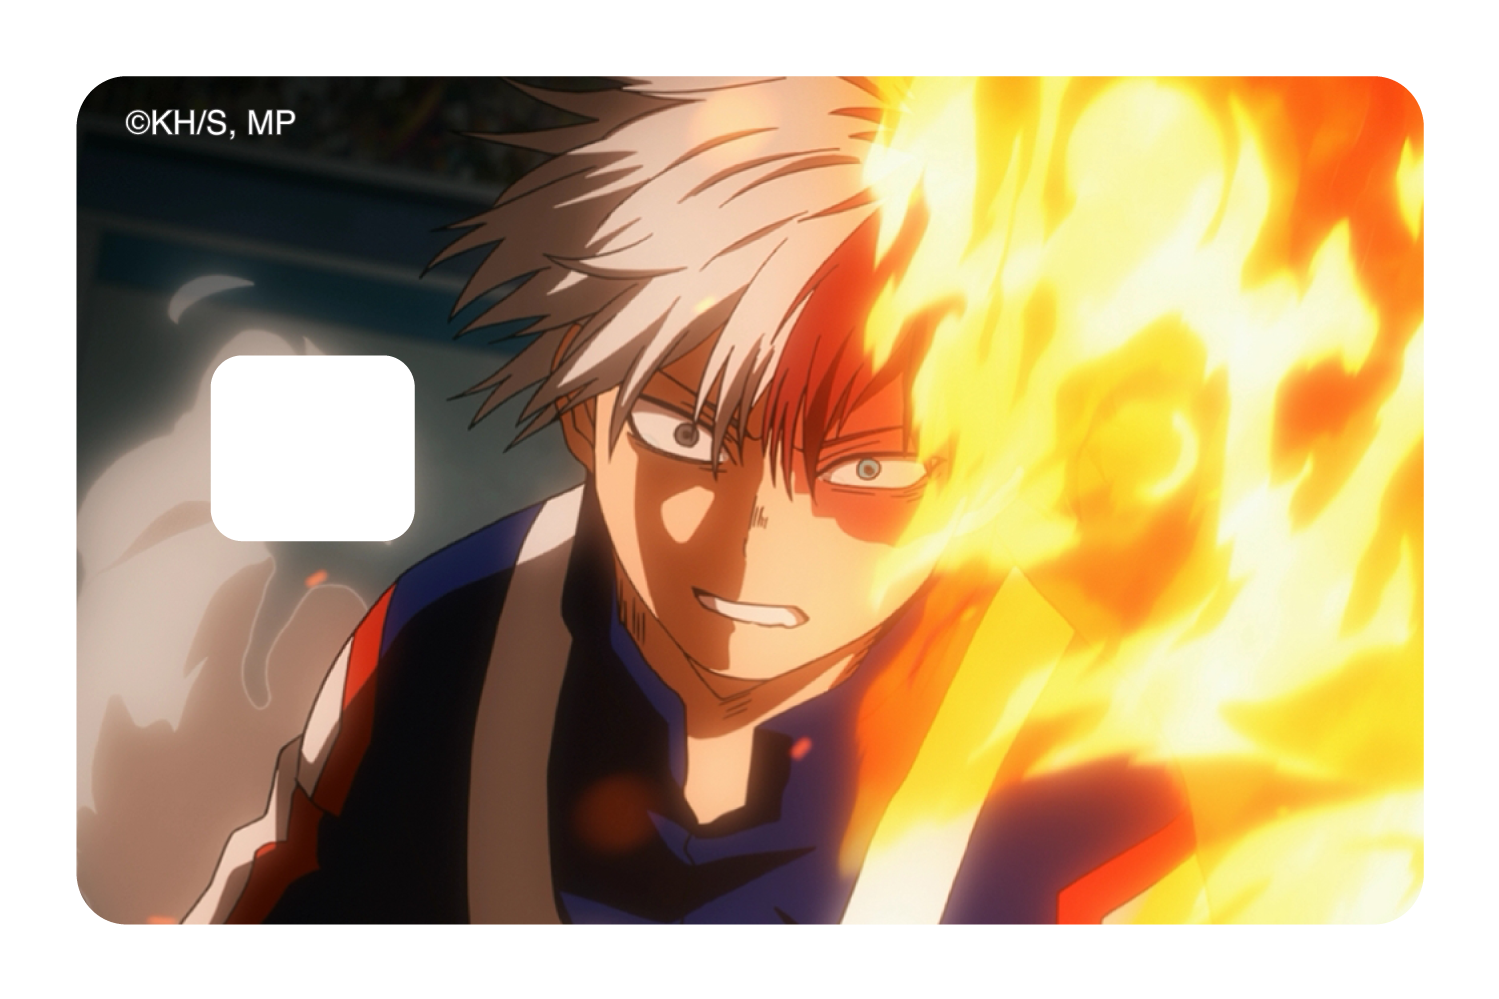 Shoto uses his fire